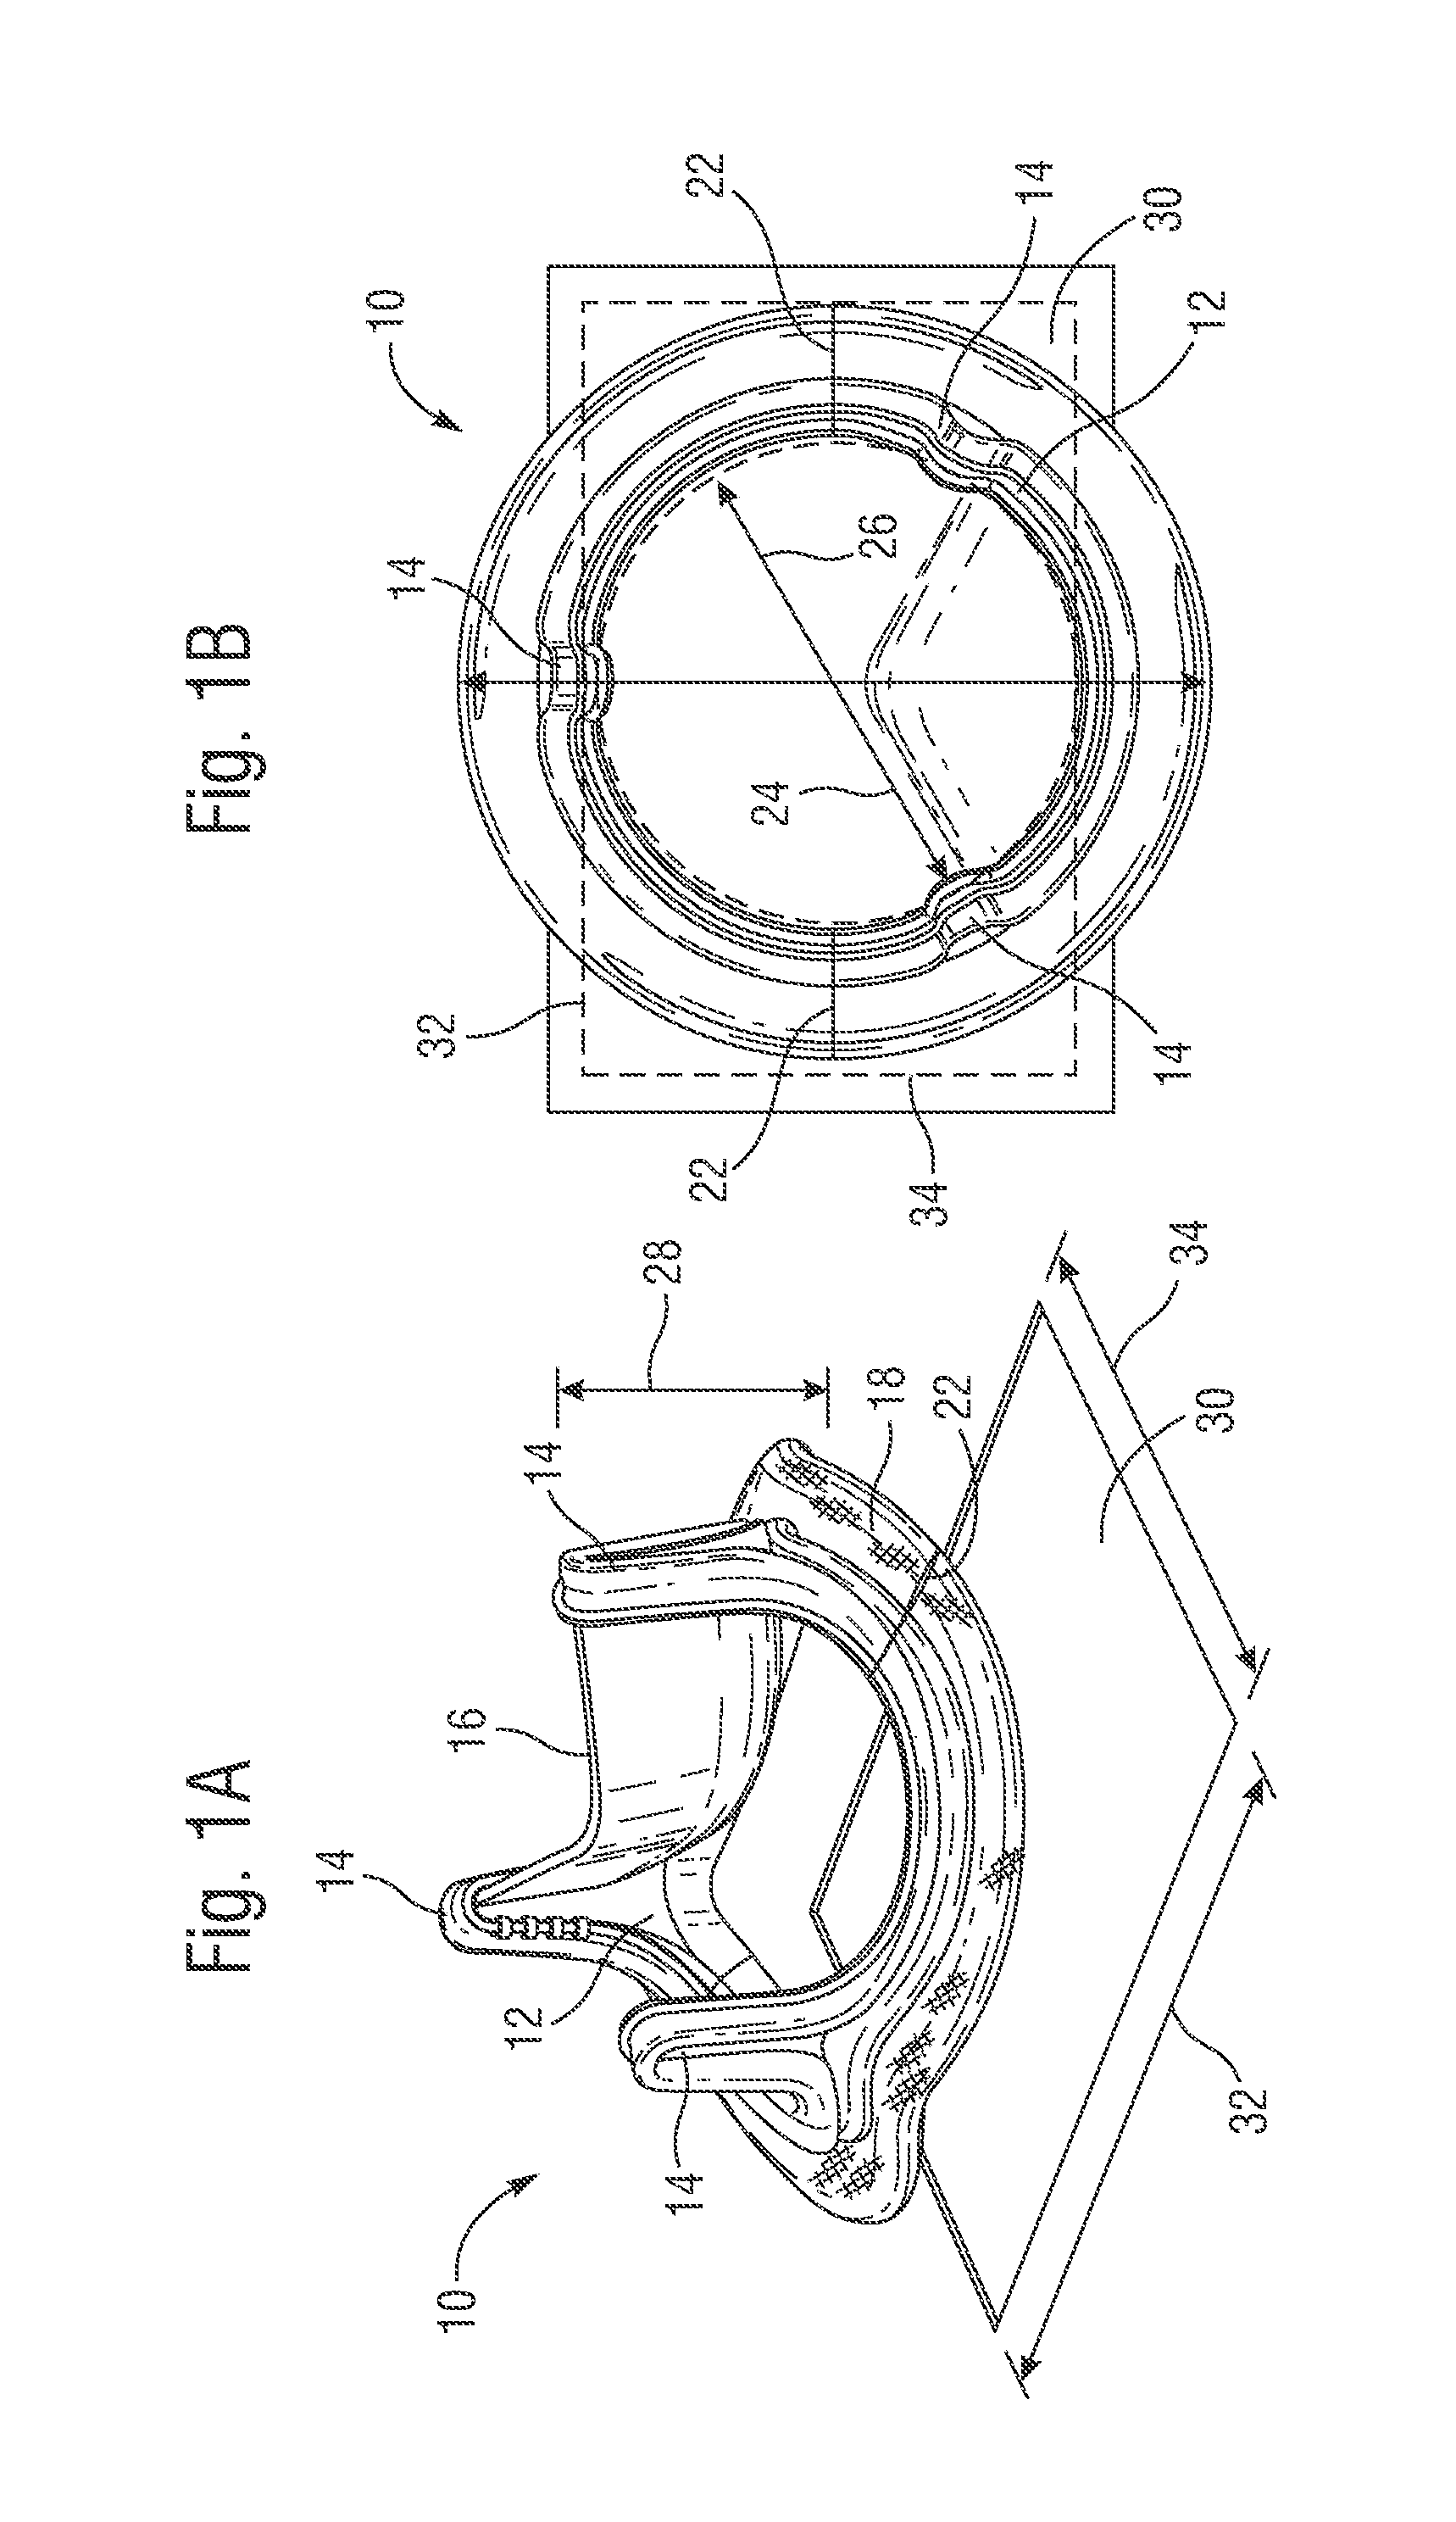 Collapsible cardiac implant and deployment system and methods